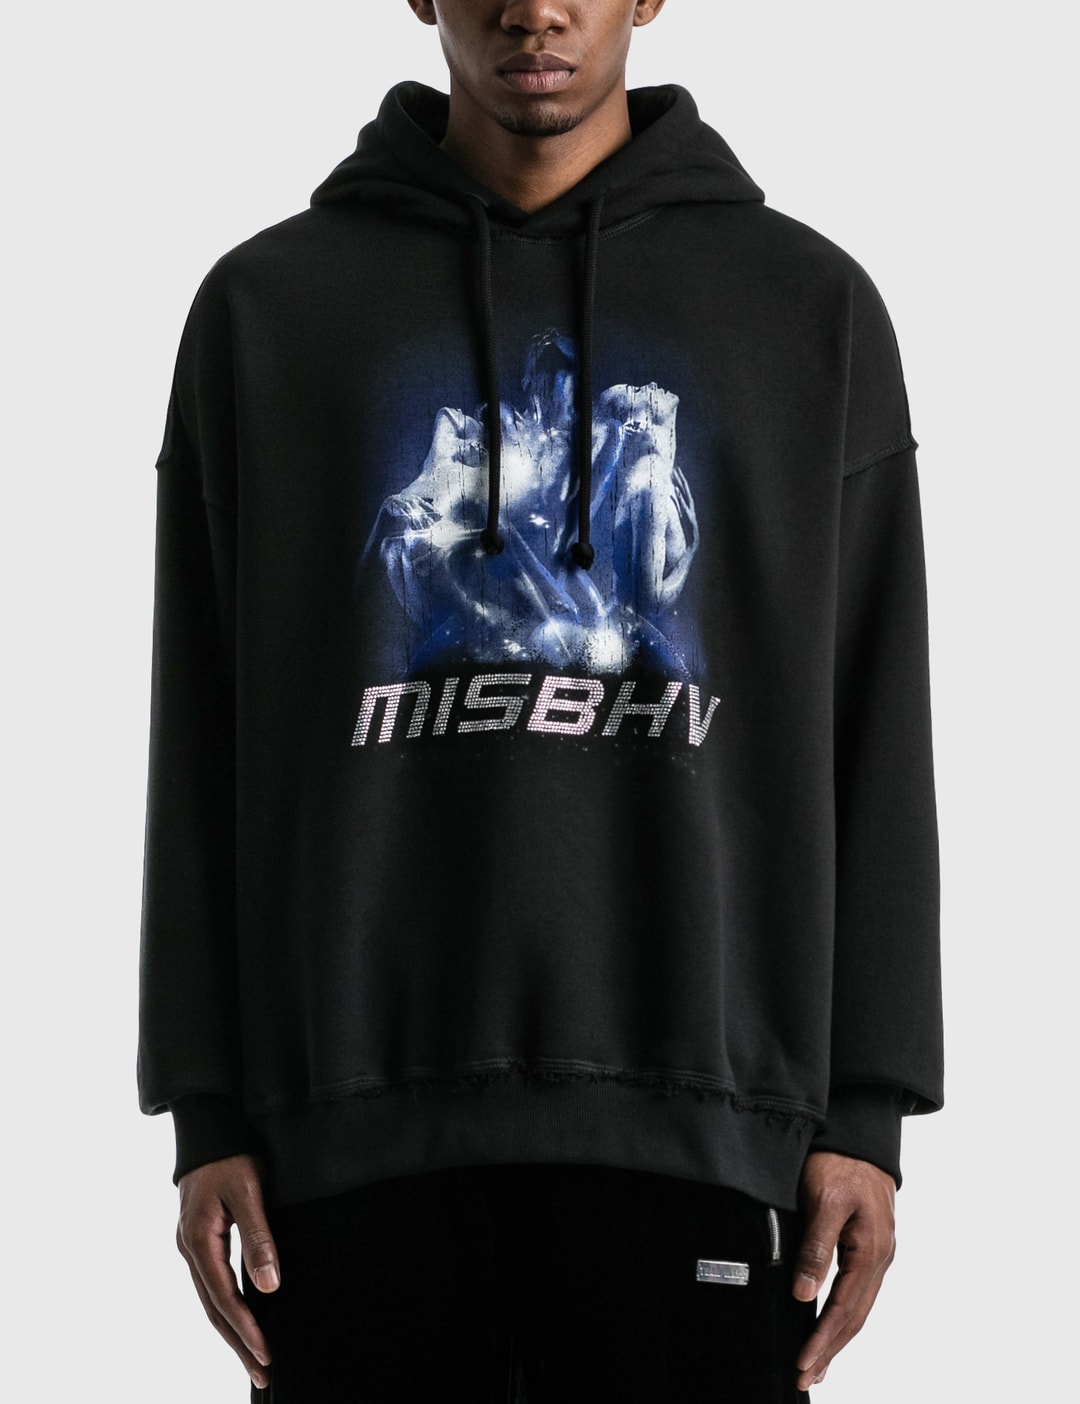 Whirlpool Seminary Sorg Misbhv - 2001 Polizei Hoodie | HBX - Globally Curated Fashion and Lifestyle  by Hypebeast